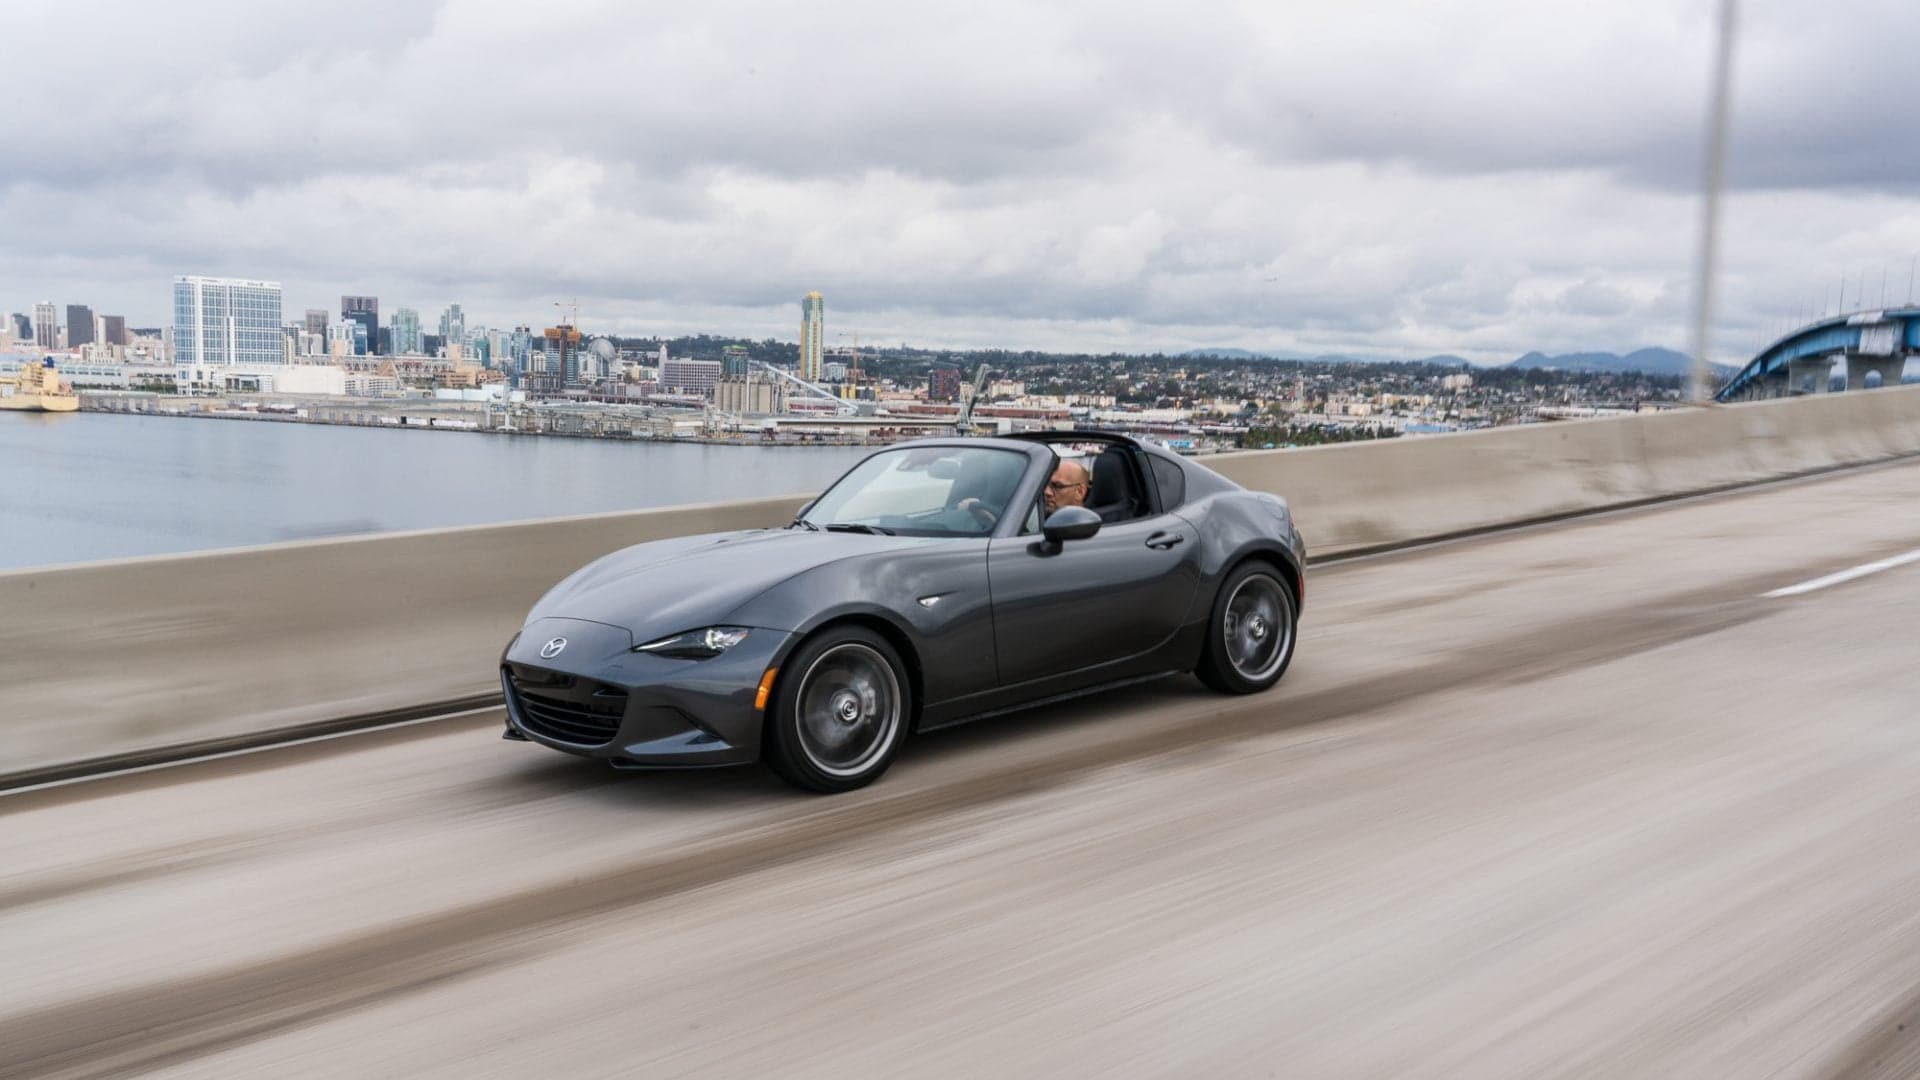 2019 Mazda MX-5 Reportedly Gets 181 HP and a Higher Redline